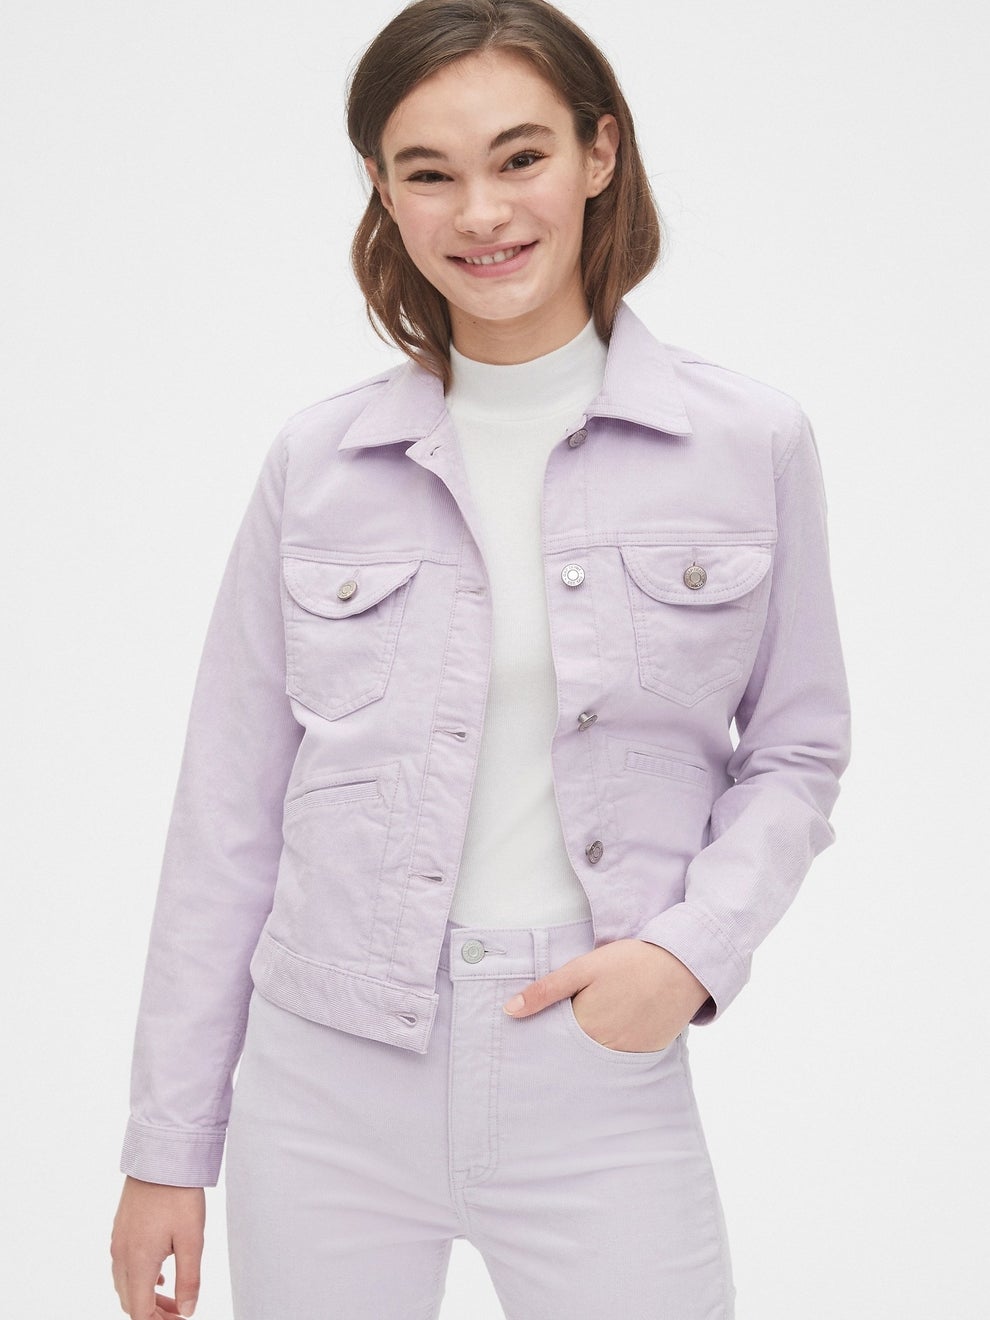 23 Light Jackets That Reviewers Truly Love